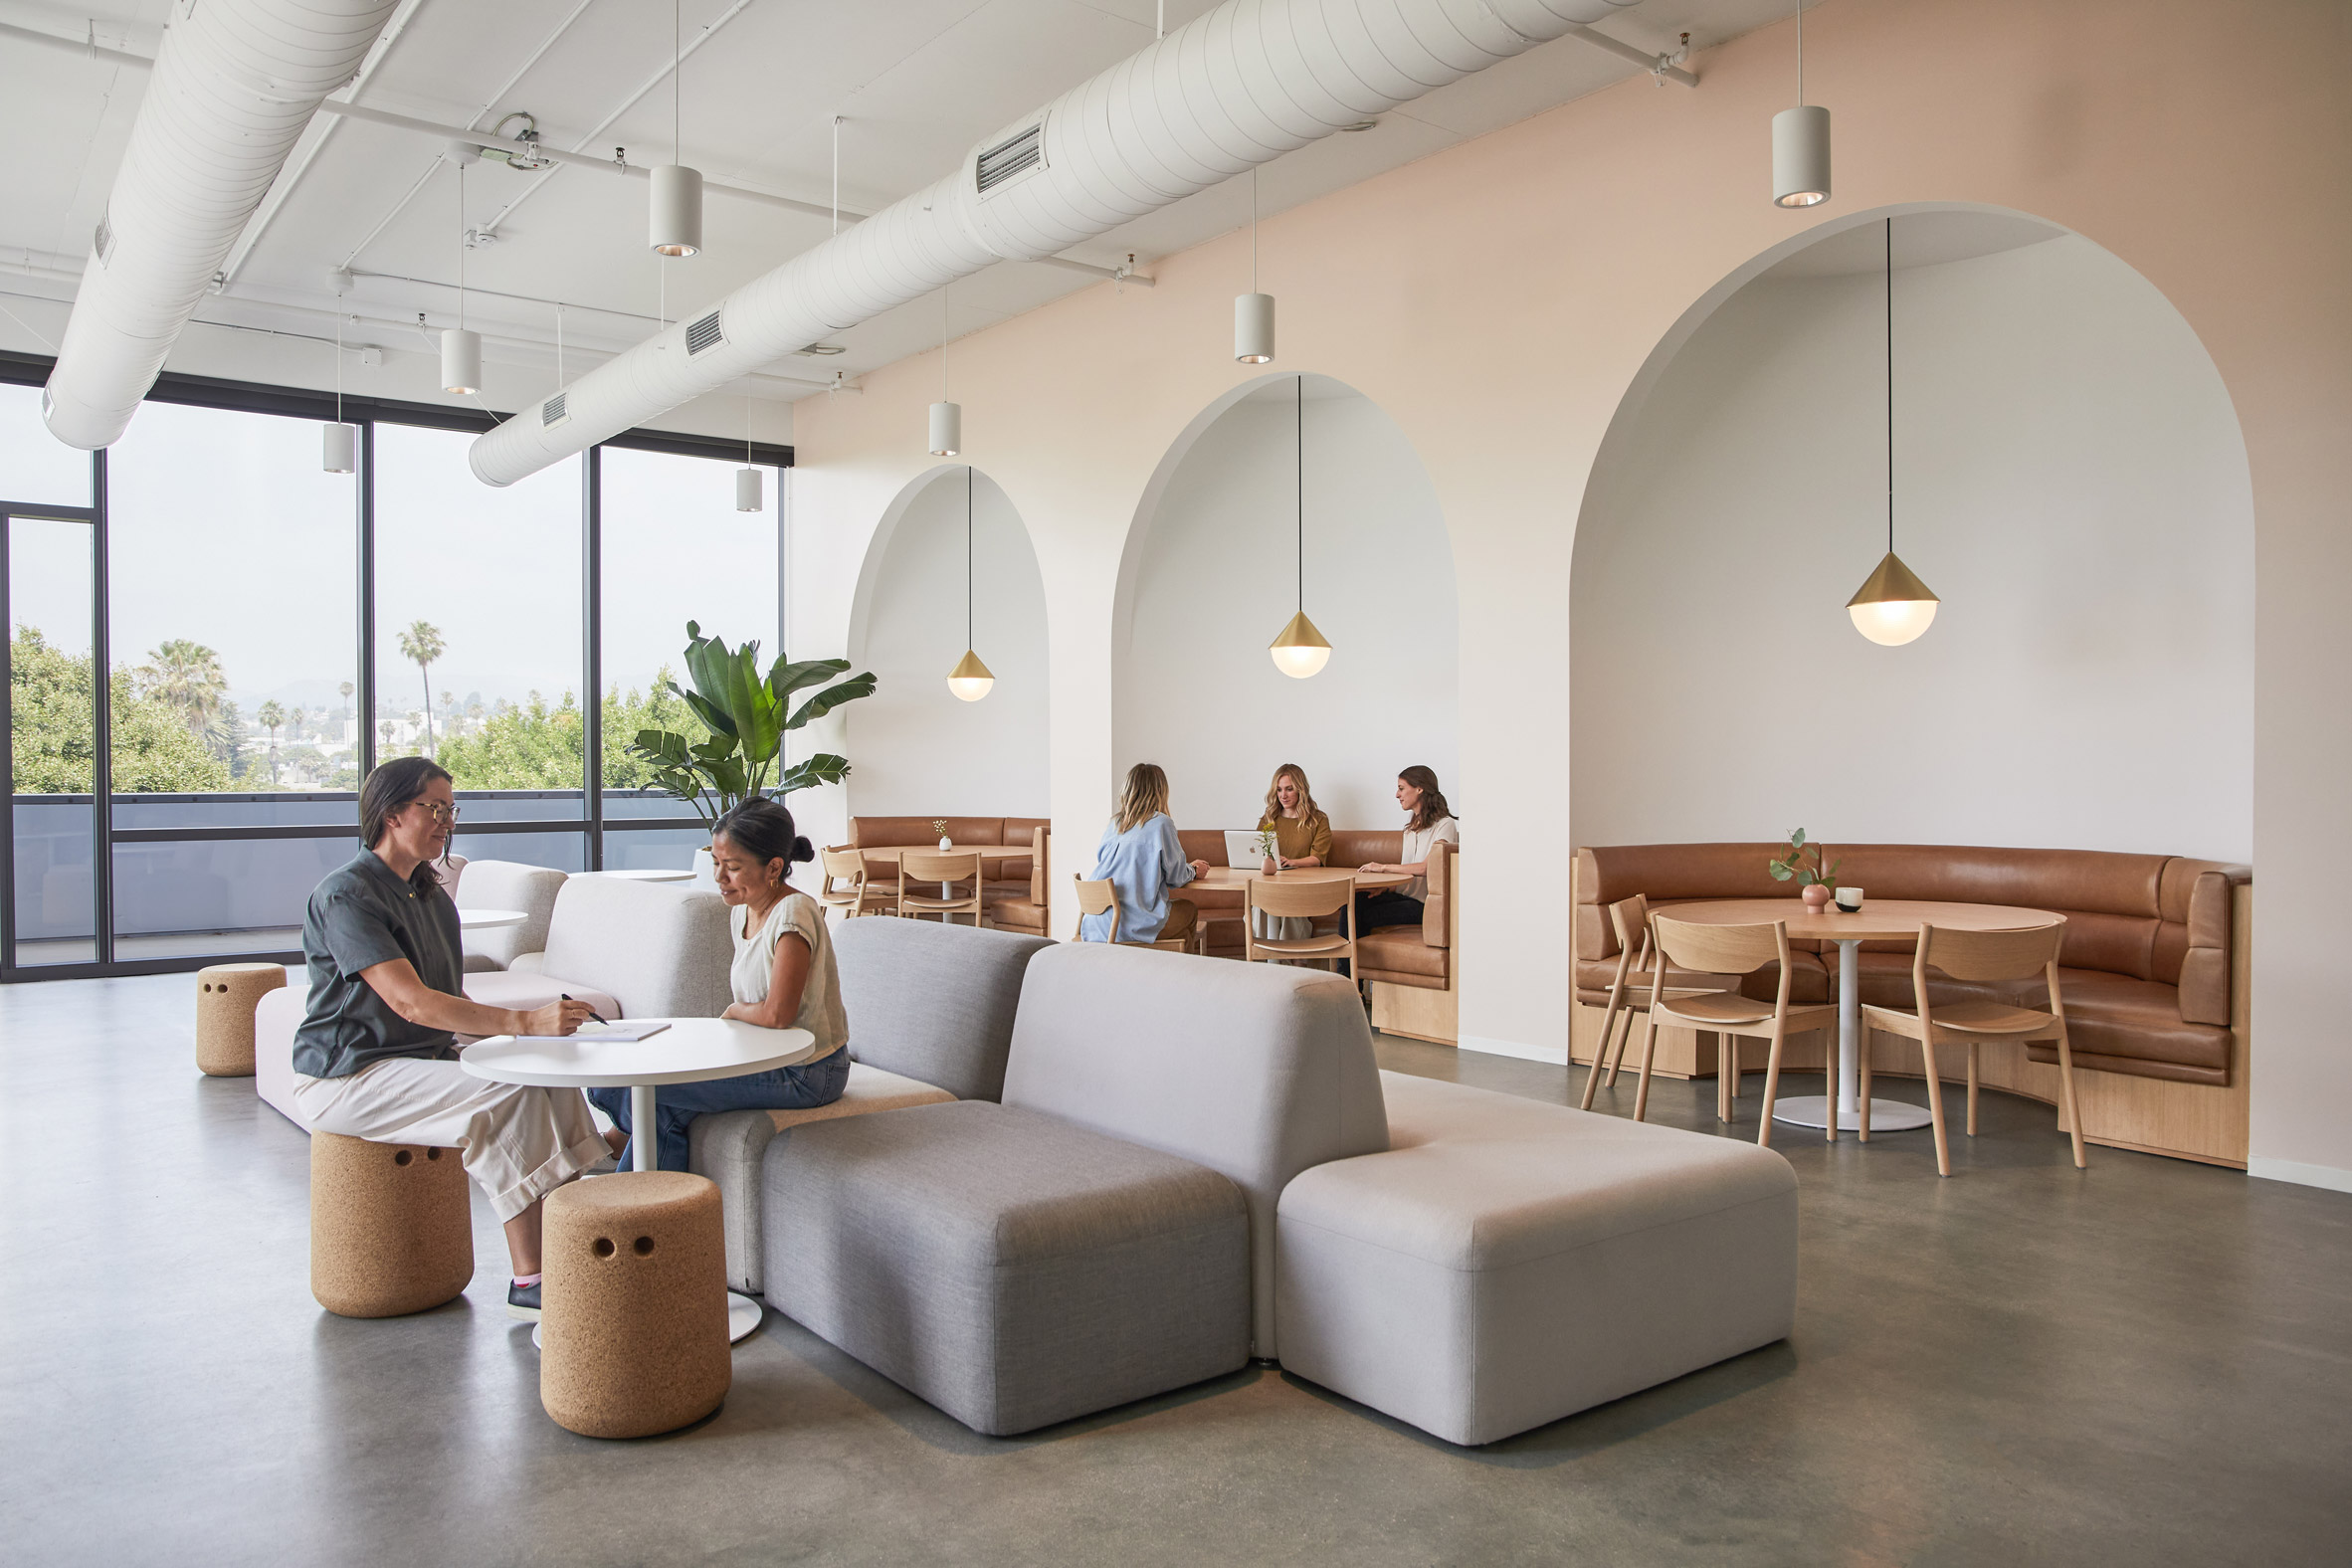 Arched seating niches feature in Goop headquarters designed by Rapt Studio